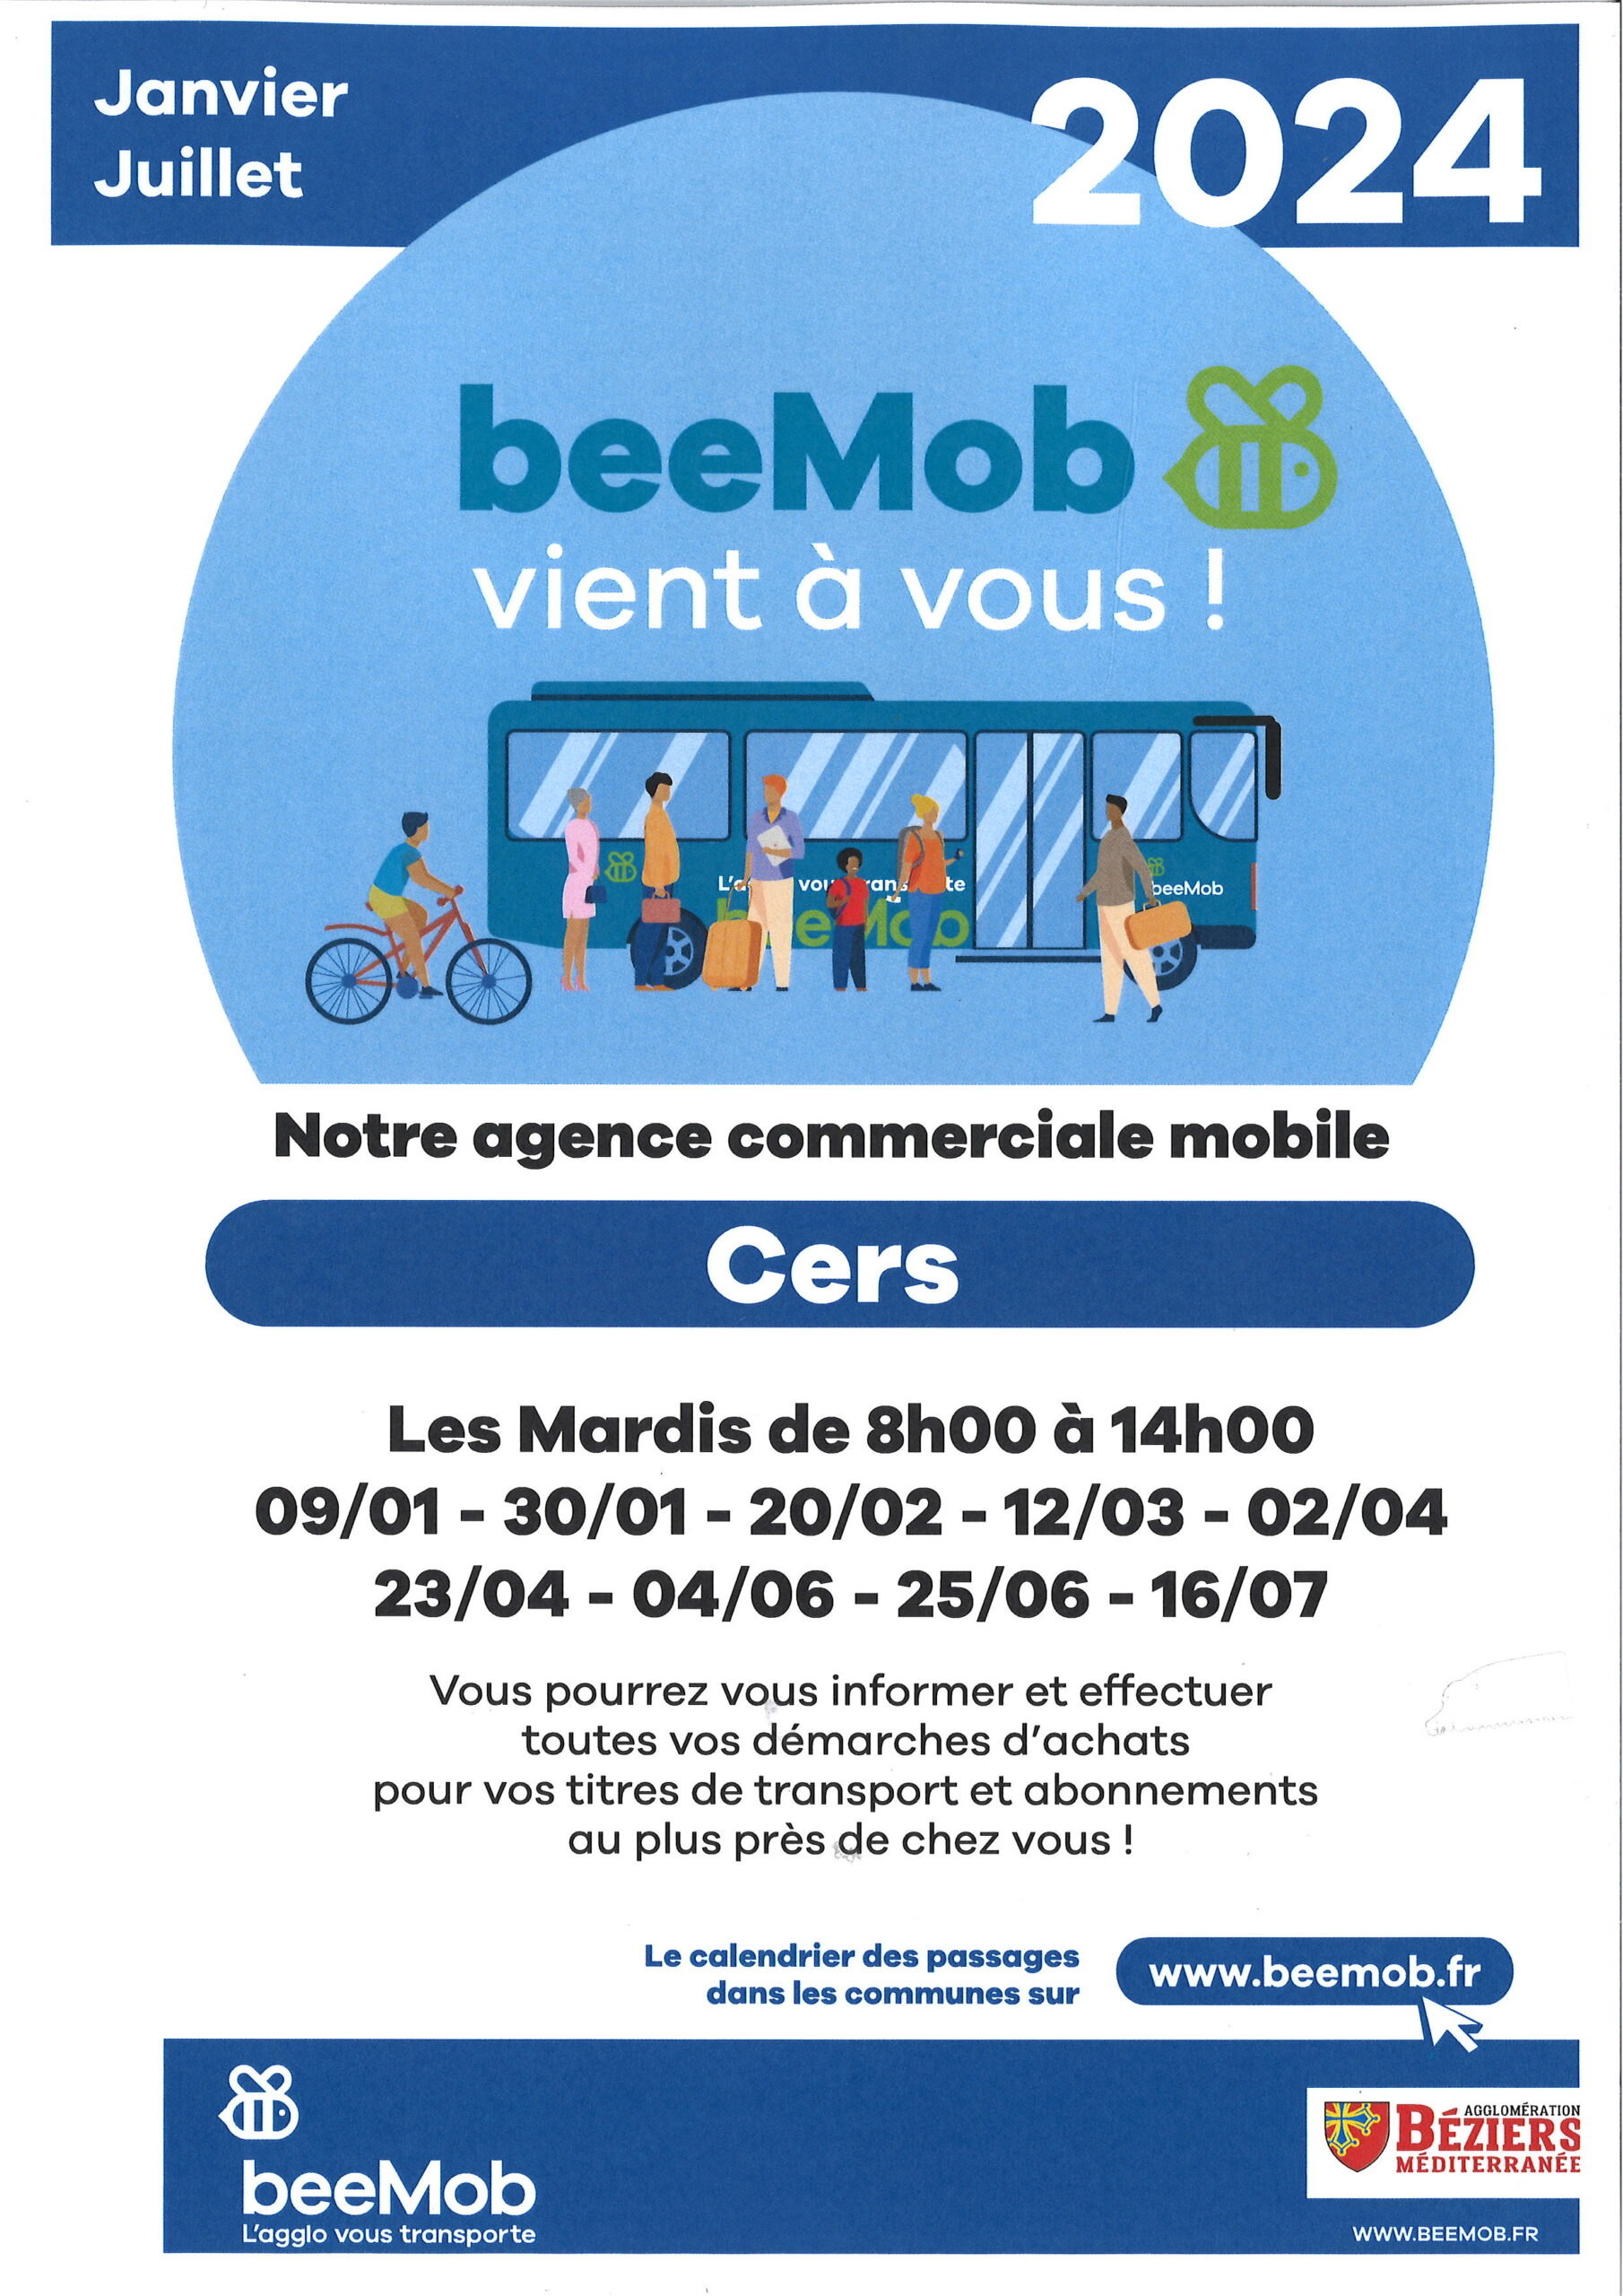 You are currently viewing Bee Mob janvier / juillet 2024